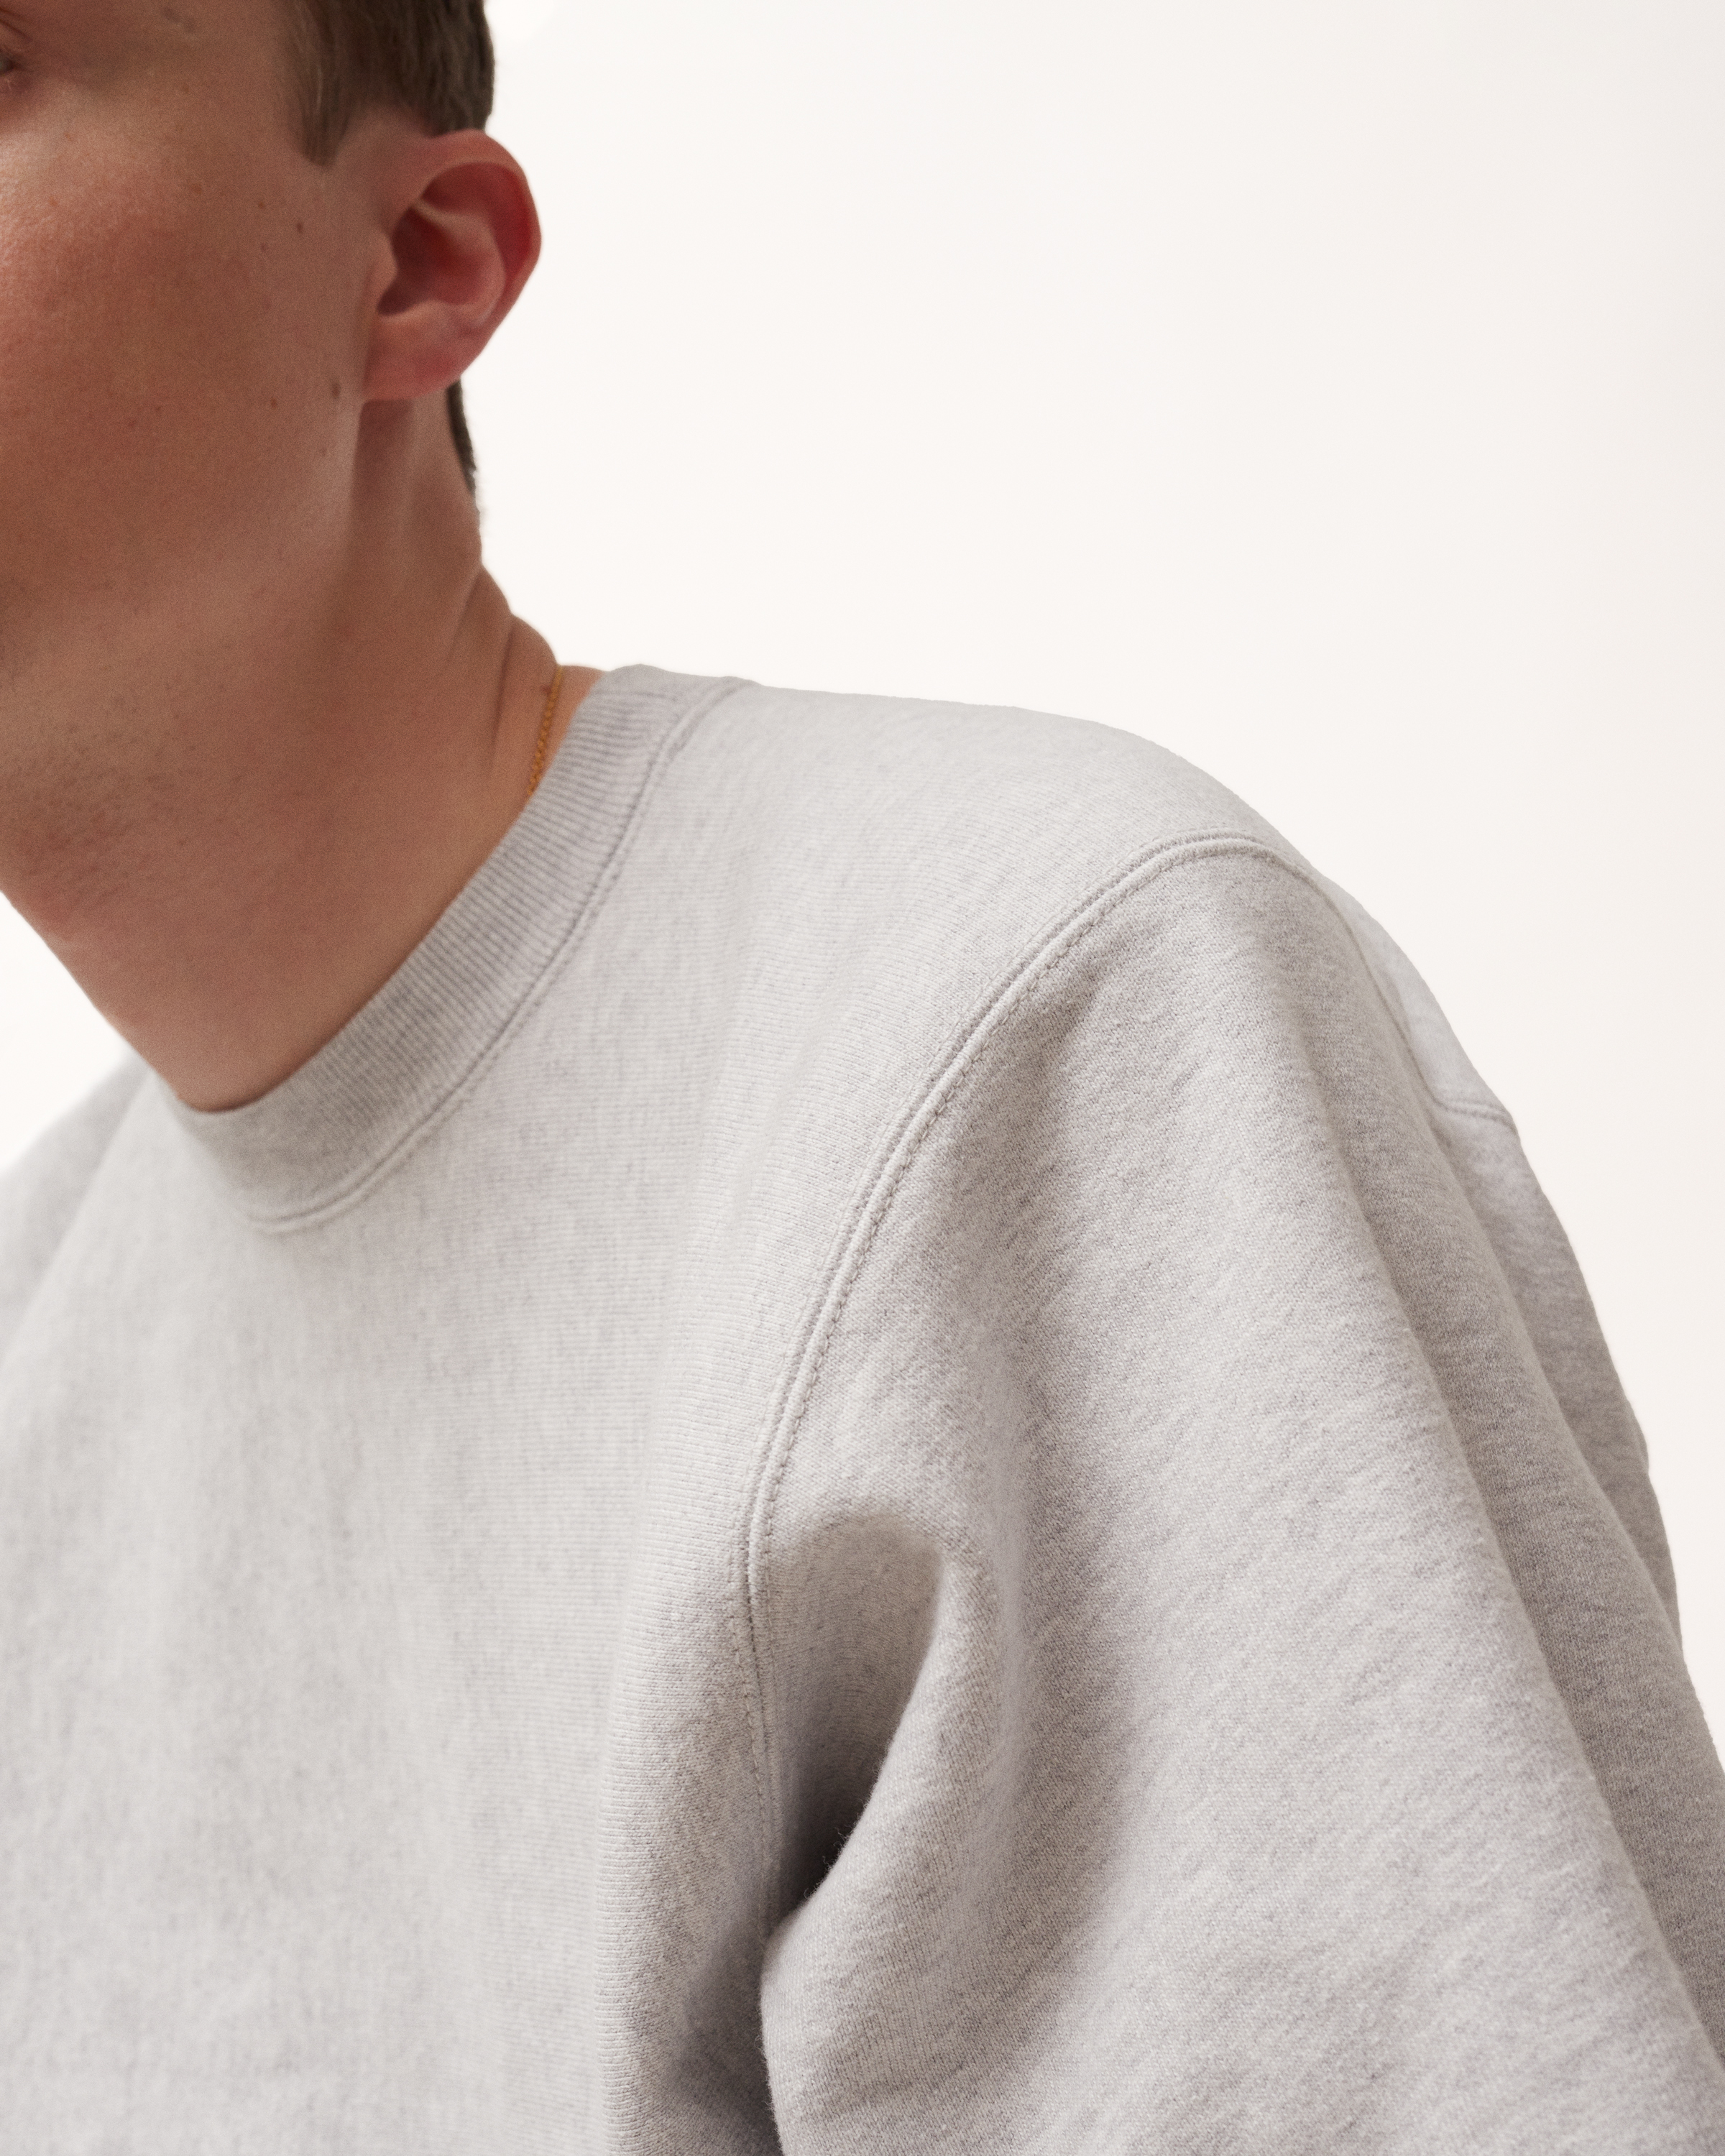 Norse Store  Shipping Worldwide - orSlow REVERSE WEAVE HEAVY WEIGHT VINTAGE  CREW NECK SWEAT SHIRT - Light Gray